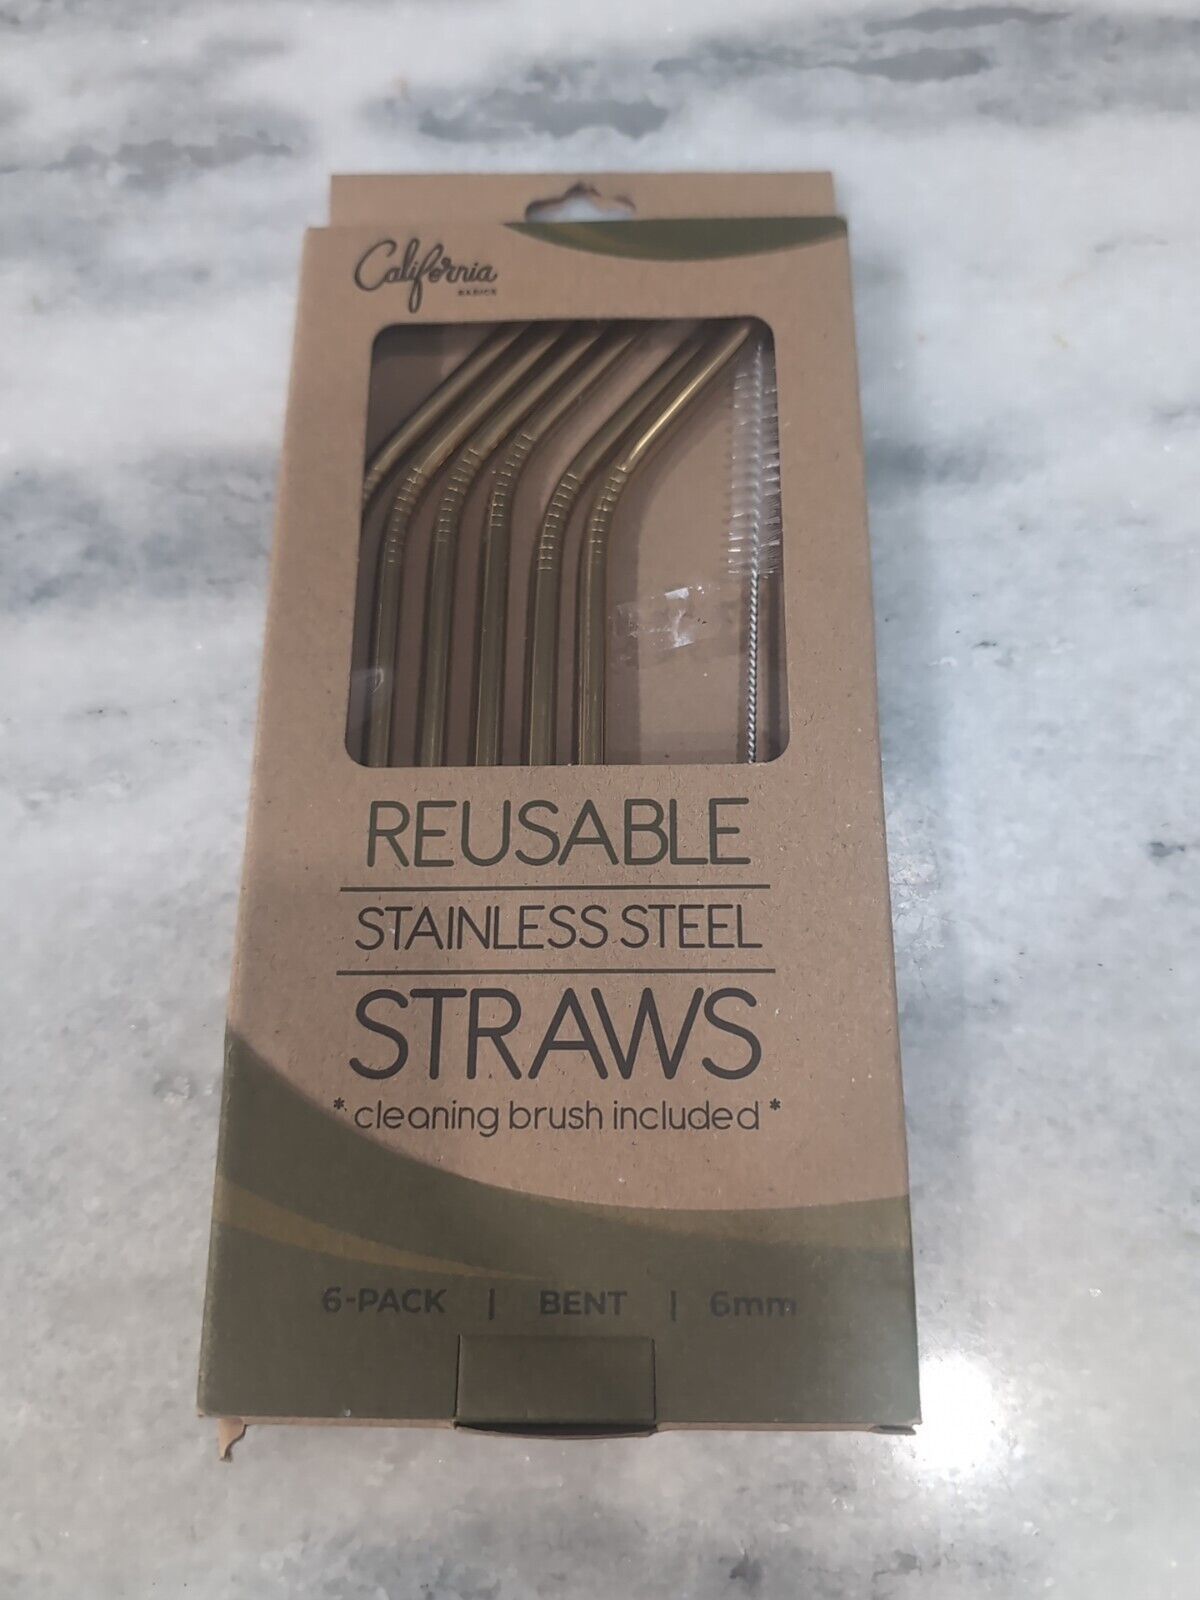 Primary image for California Home Goods Gold Stainless Steel Straws, 8.5" Reusable Straw, Set of 6